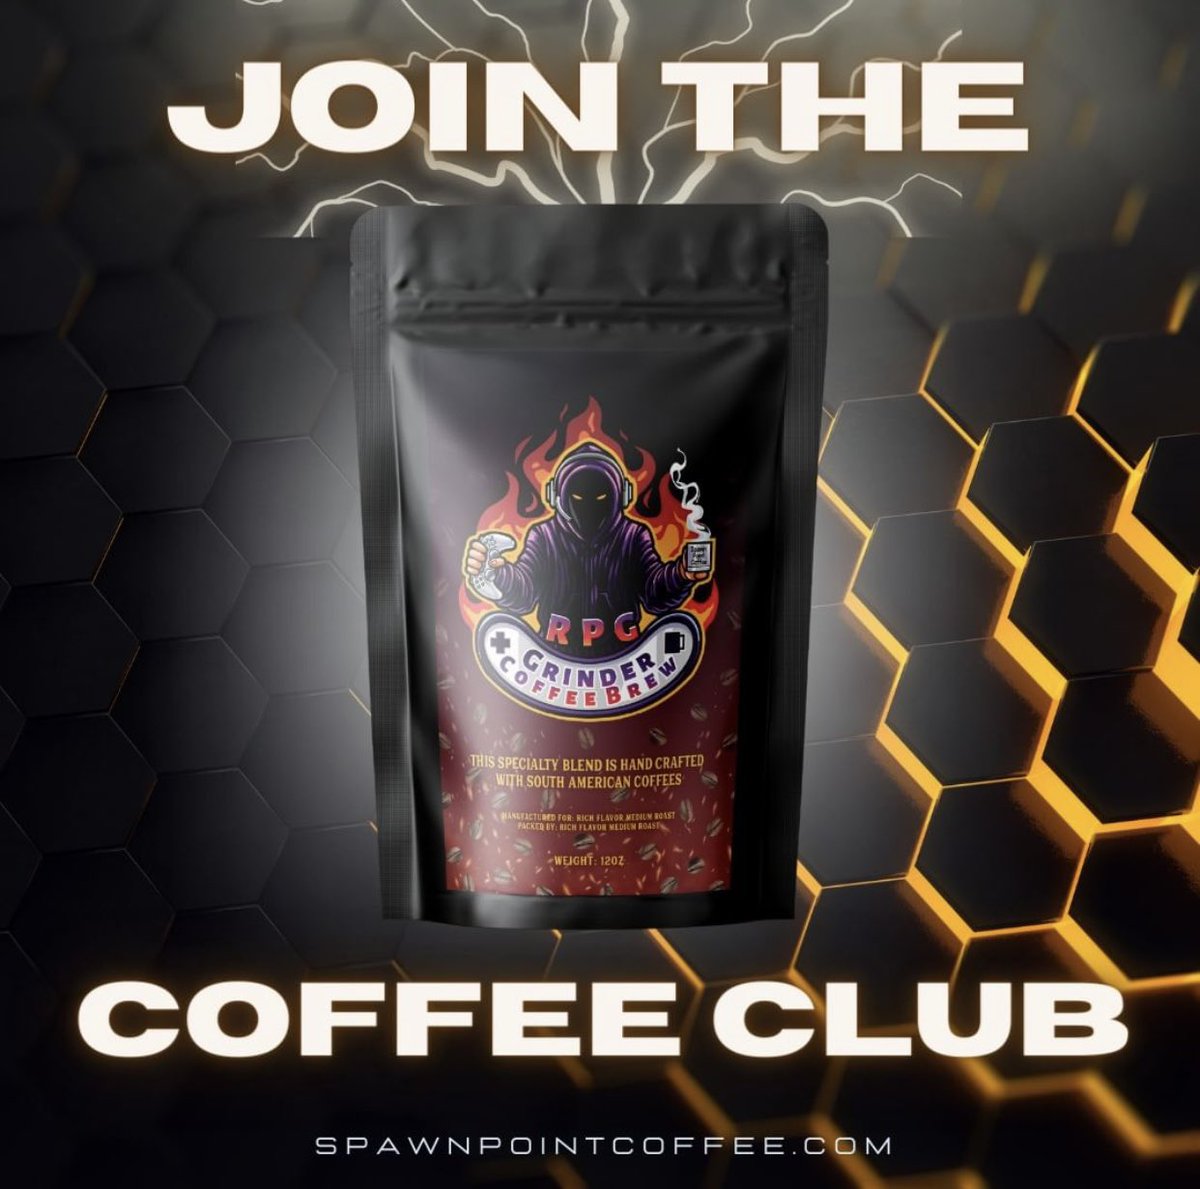 Don't miss out - Coffee Perks can help turn each sip into savings.

spawnpointcoffee.com/pages/subscrip…

#spawnpointcoffee #coffee #coffeelover #coffeetime #gamer #games #videogames #gamers #coffeebrew #coffeeclub #rewards #waytosave #signuptoday #rpgcoffee